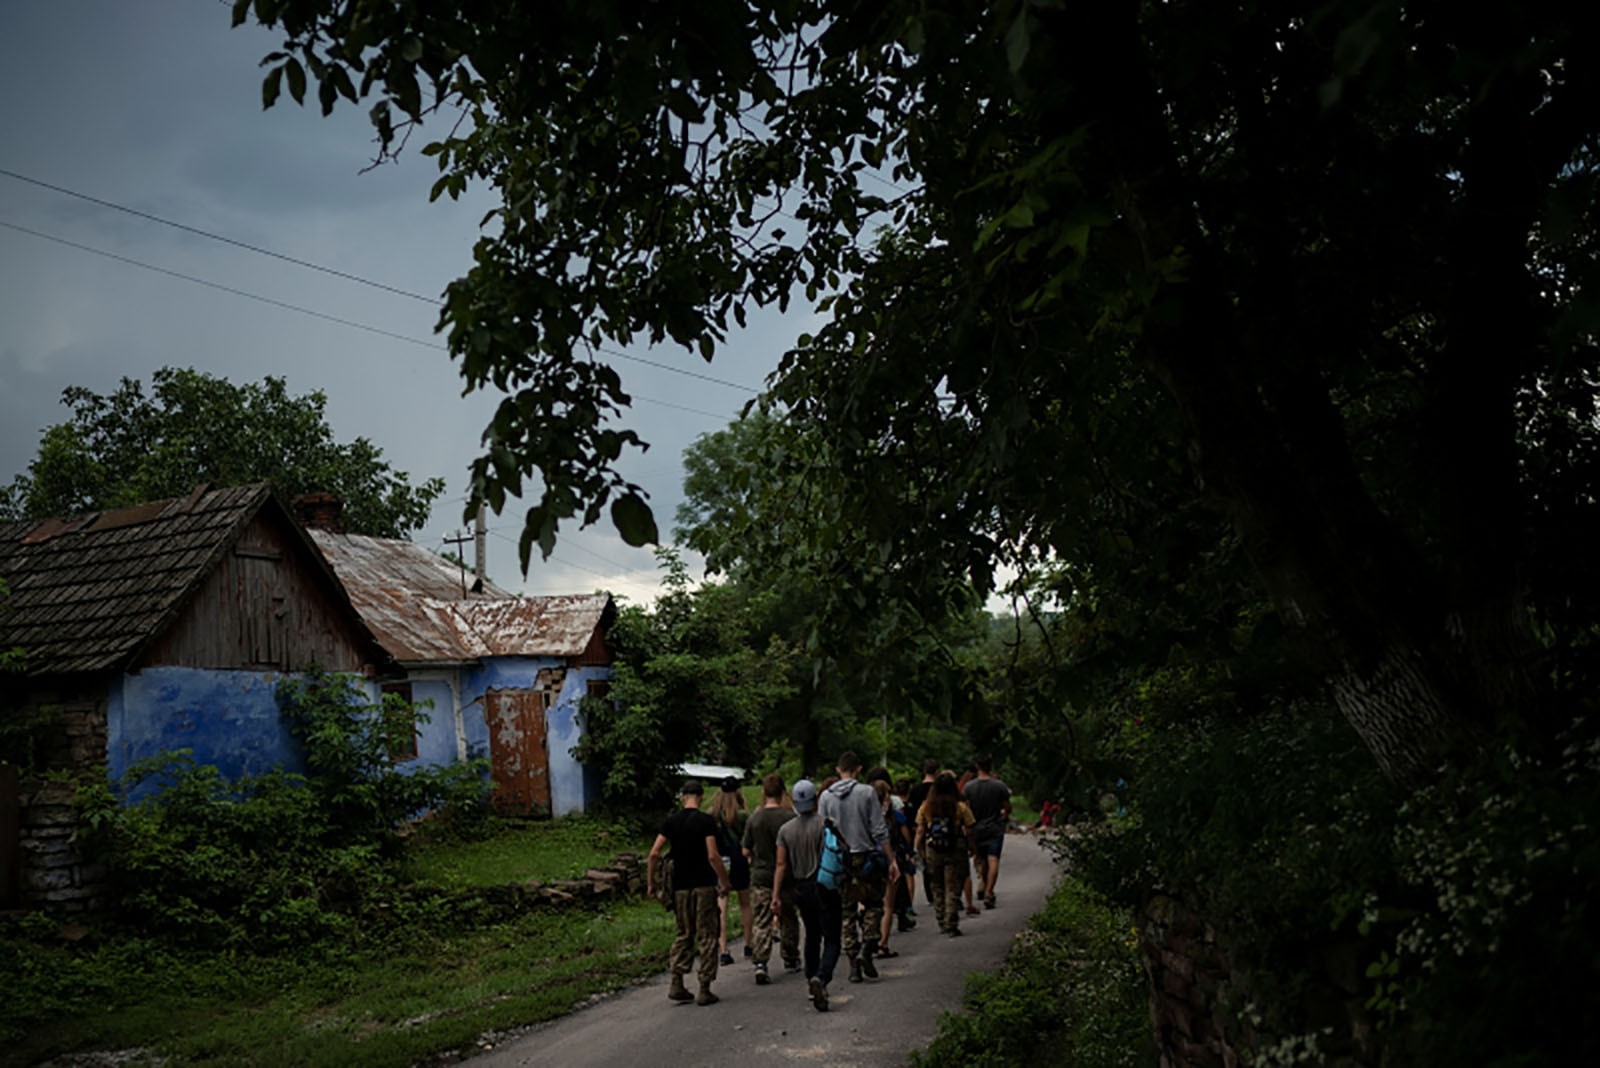 Young participants of the camp walk to a campsite in a village.